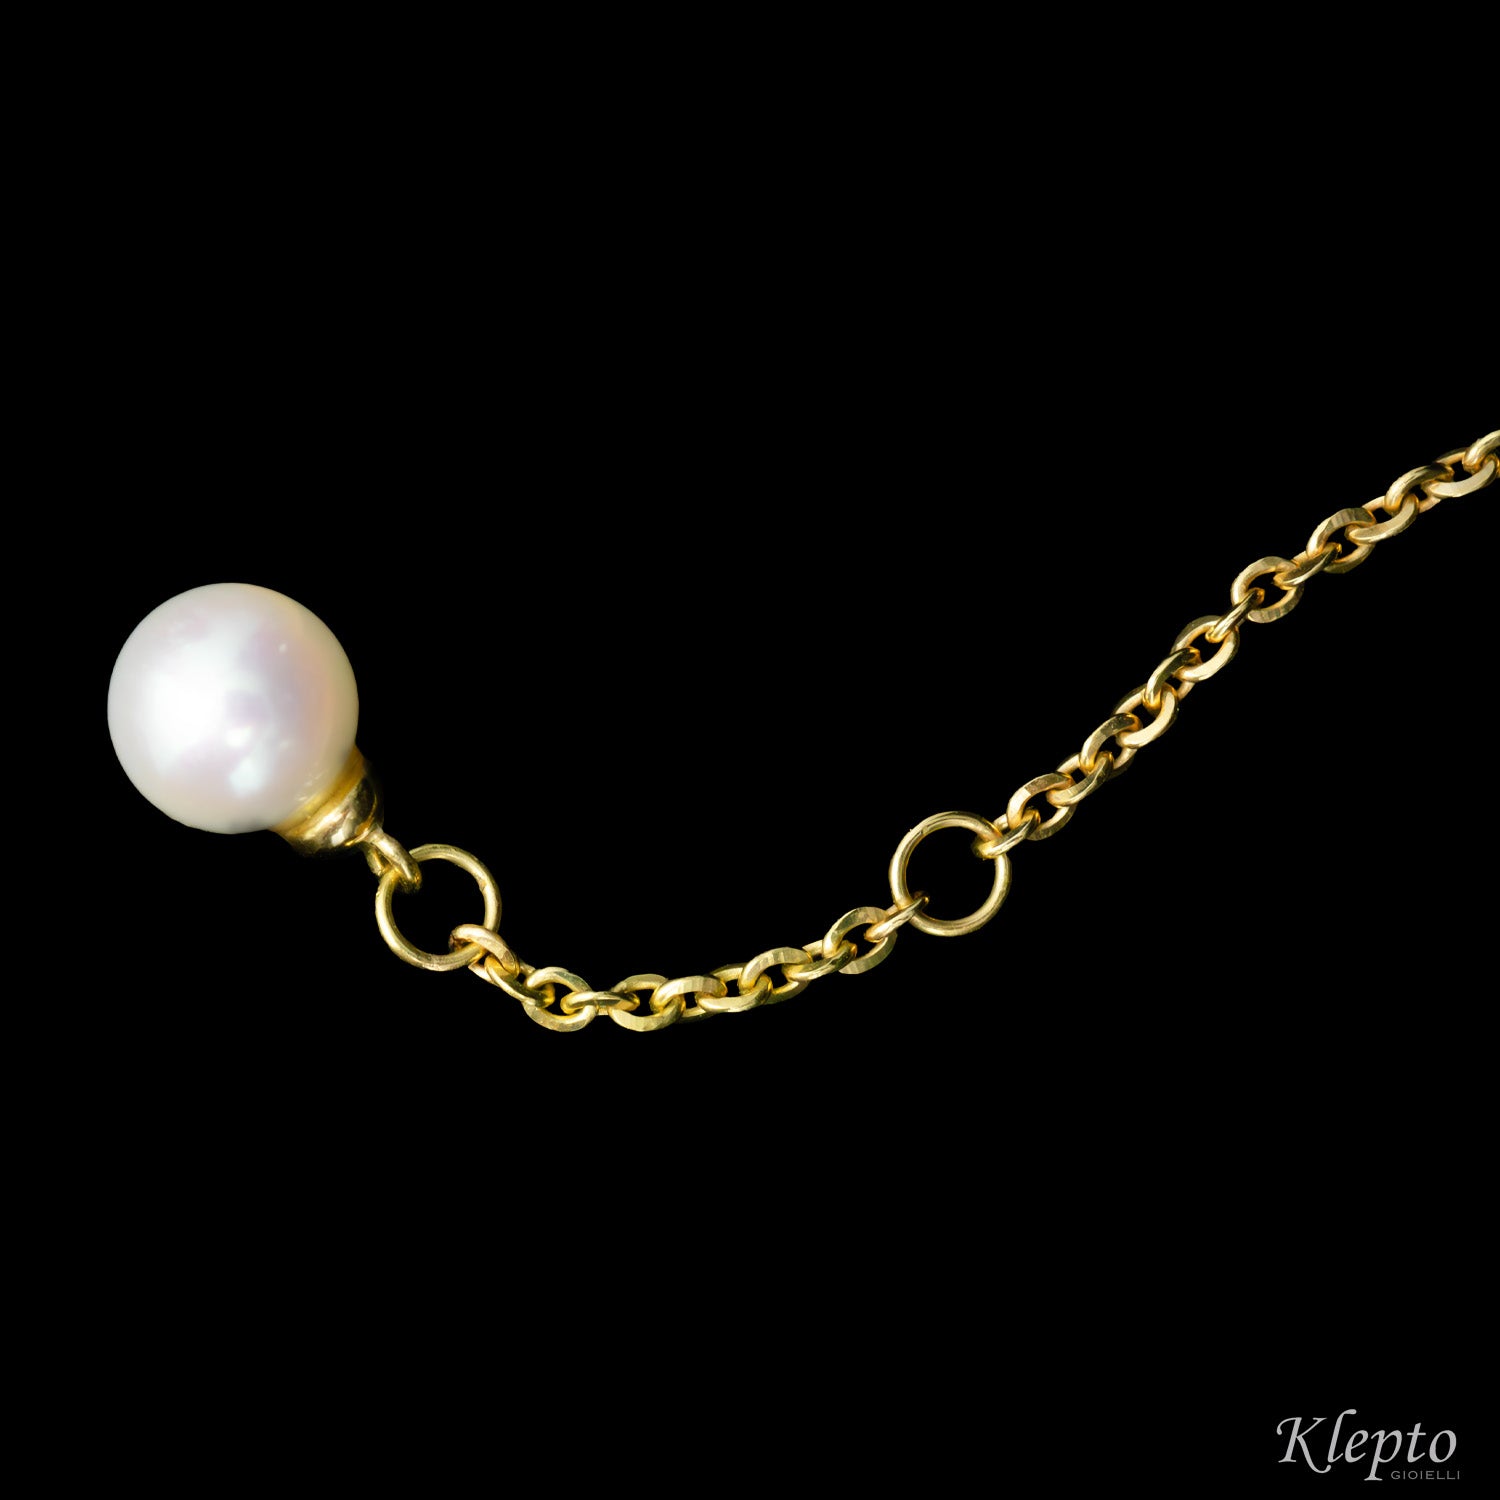 Yellow gold bracelet with Japanese pearl